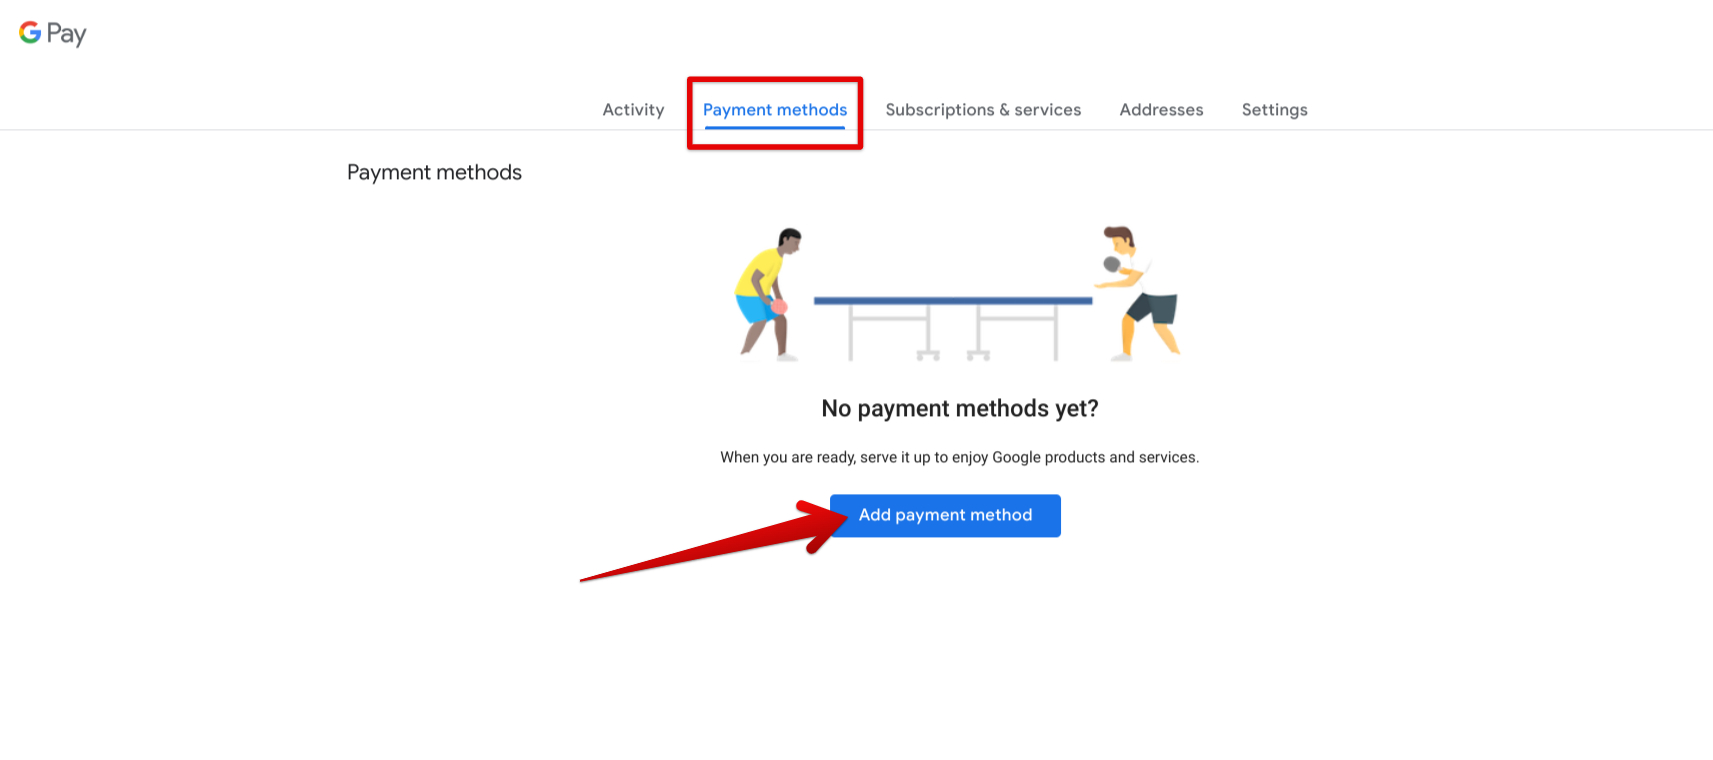 Adding a payment method to Google Pay